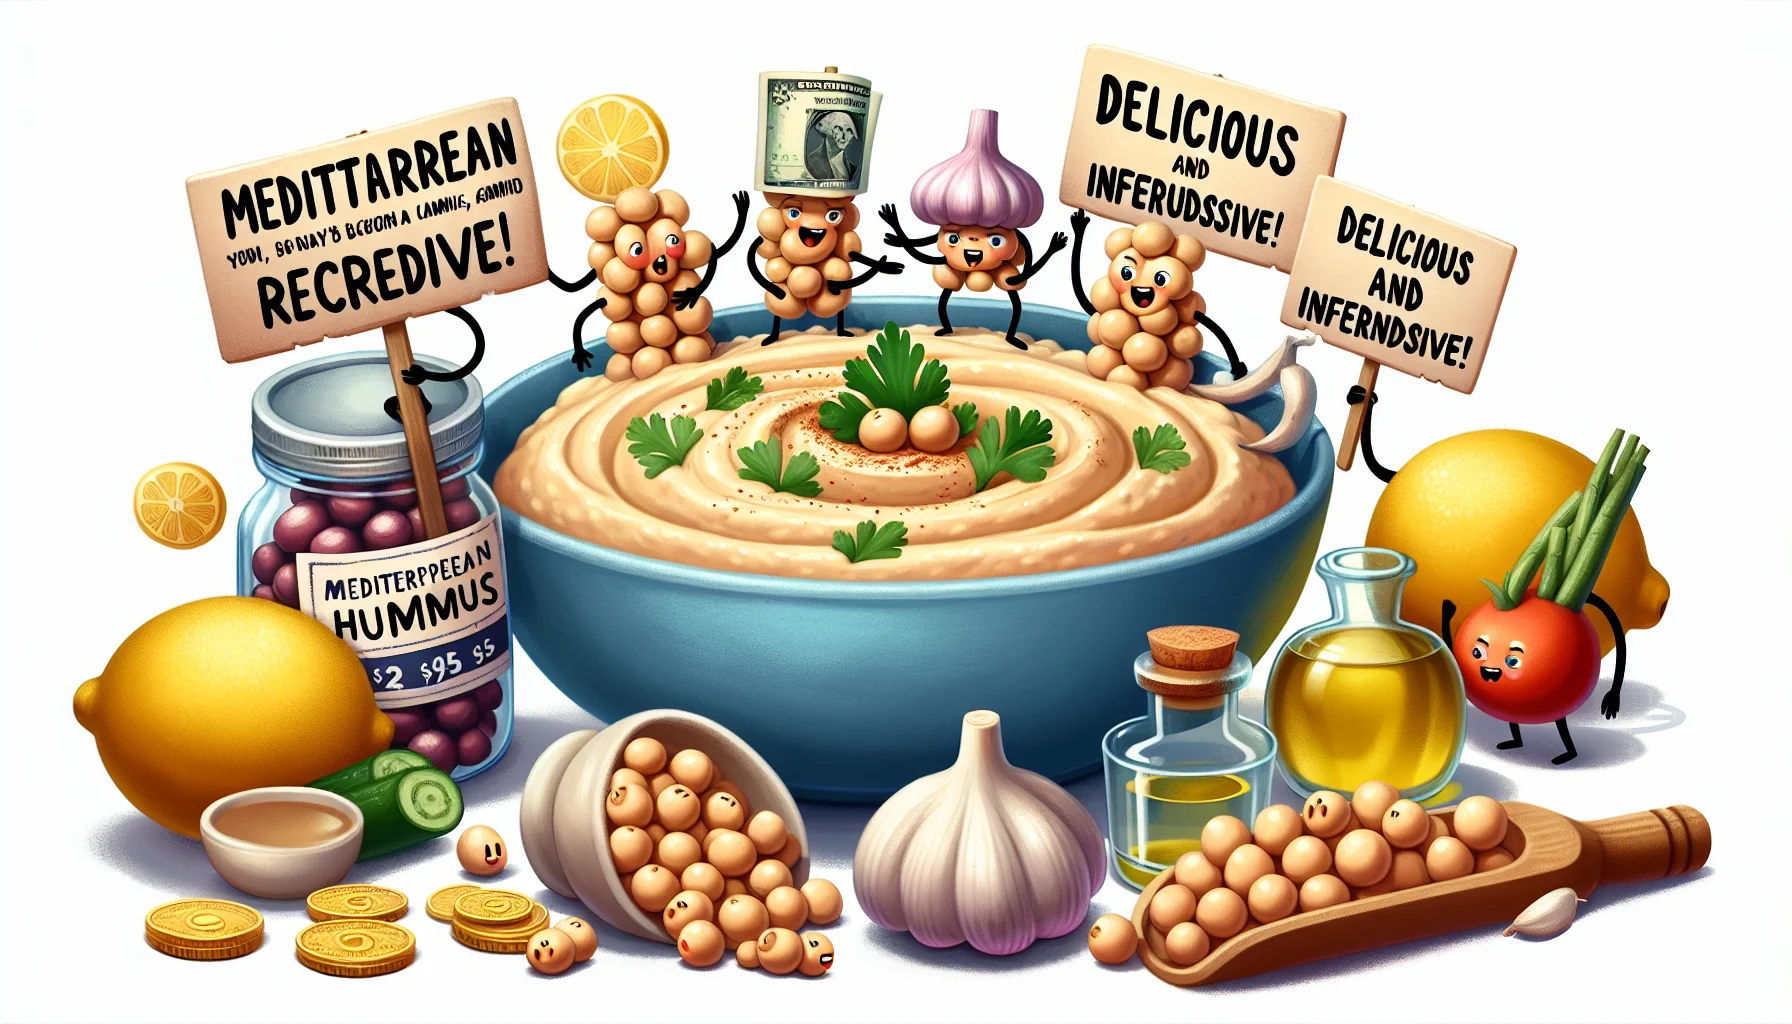 Create a whimsical image of a Mediterranean hummus recipe brought to life. Visualize the ingredients of the hummus: chickpeas, tahini, garlic, lemon, and olive oil, engaged in a playful scene. Some of them could be on a tight budget, counting coins, while others are holding signs promoting the benefits of eating healthy and exclaim: 'Delicious and inexpensive!' Ensure the depiction is realistic but still appealing and humorous to encourage healthier food choices.